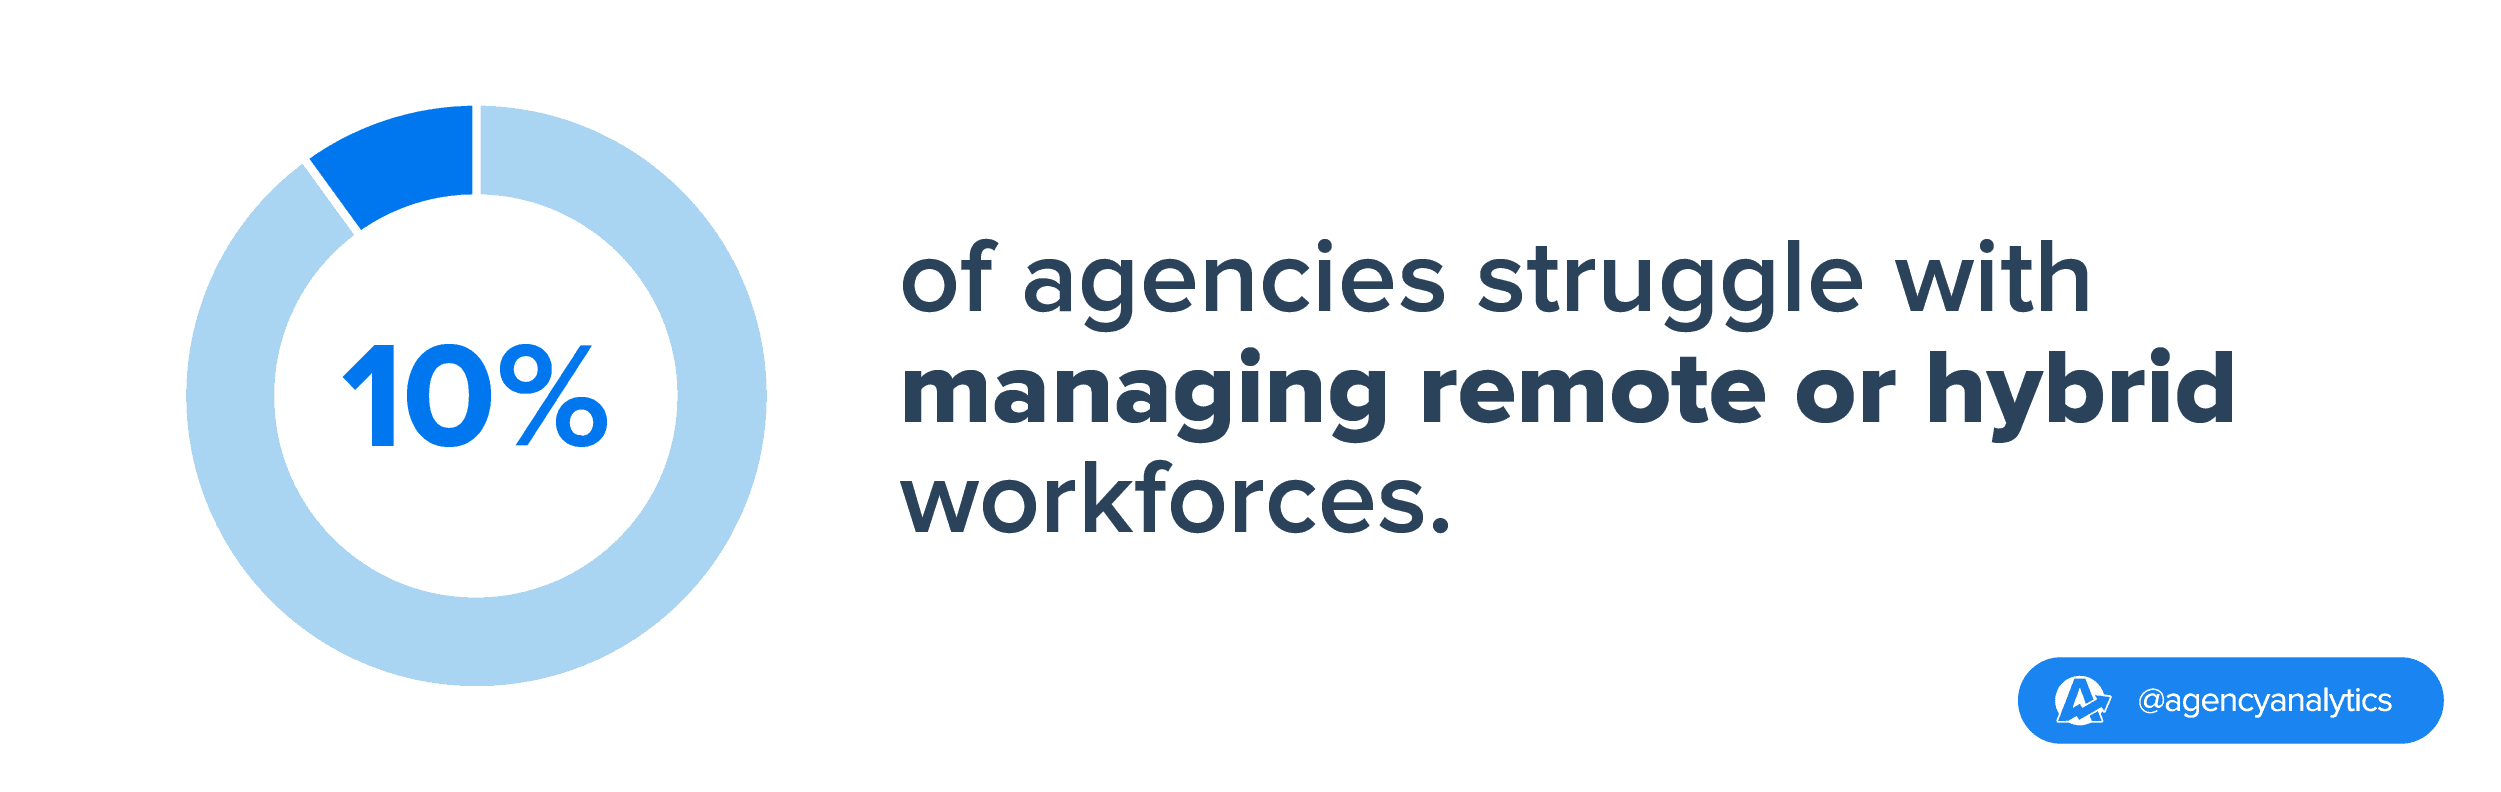 10% of agencies list managing hybrid or remote workforces as a top team management challenge